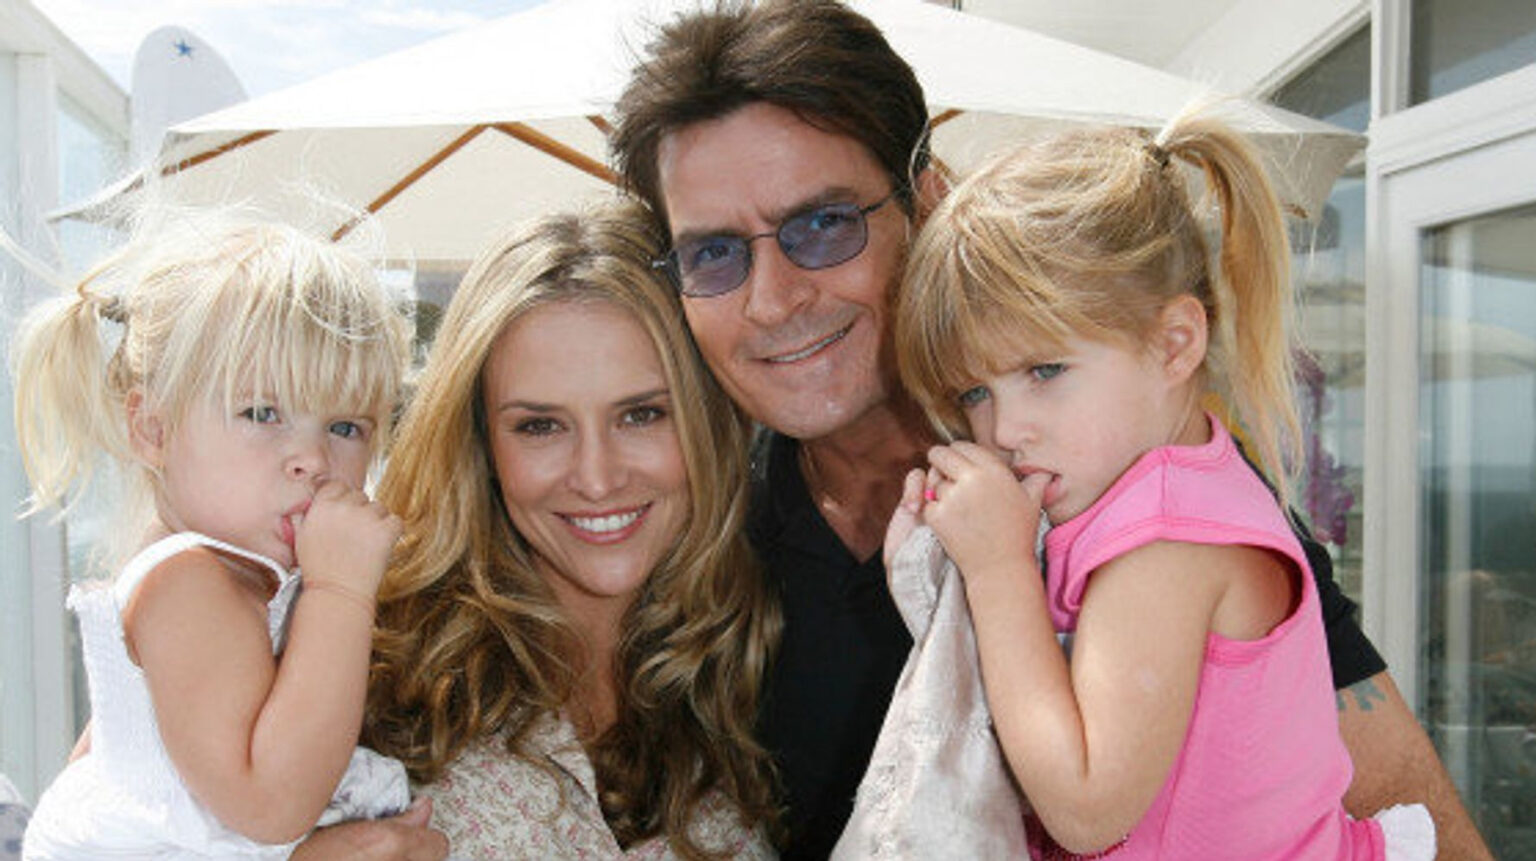 After an explosive TikTok confession, fans are speculating whether Charlie Sheen was really a bad parent. Was Denise Richards worse? Get the whole story.